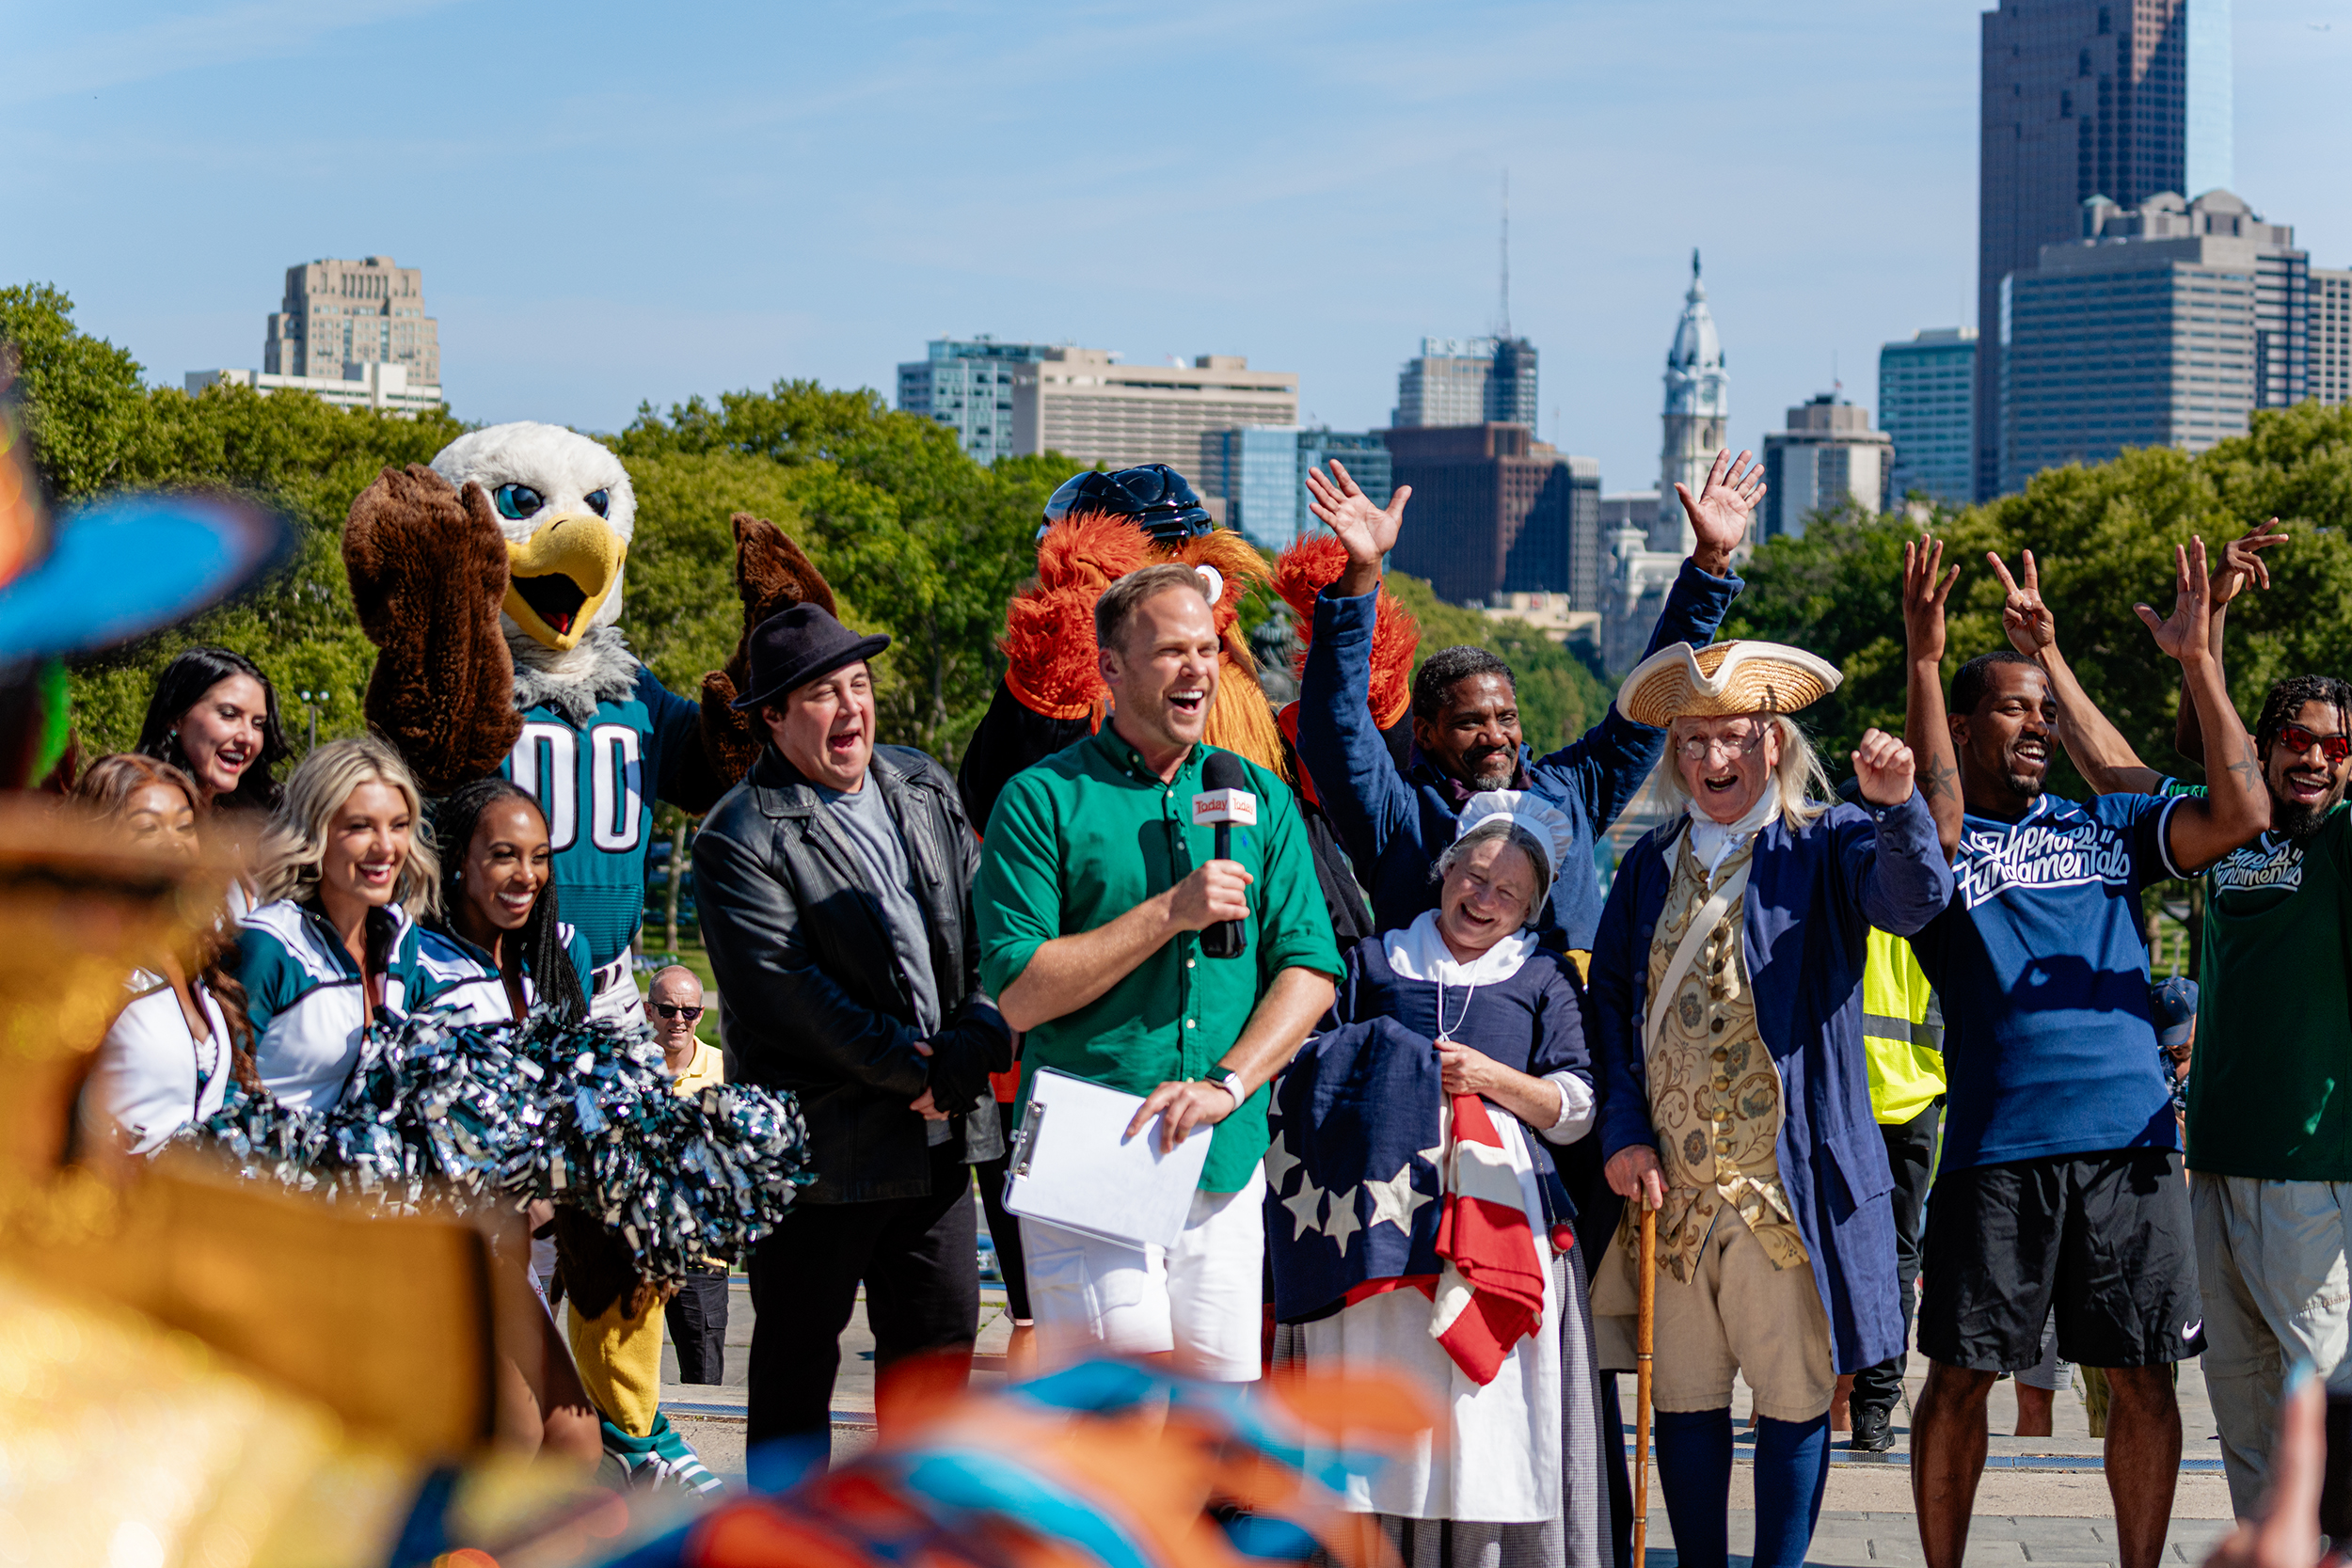 A news reporter is surrounded with Philadelphia's mascots and the city skyline in the background.